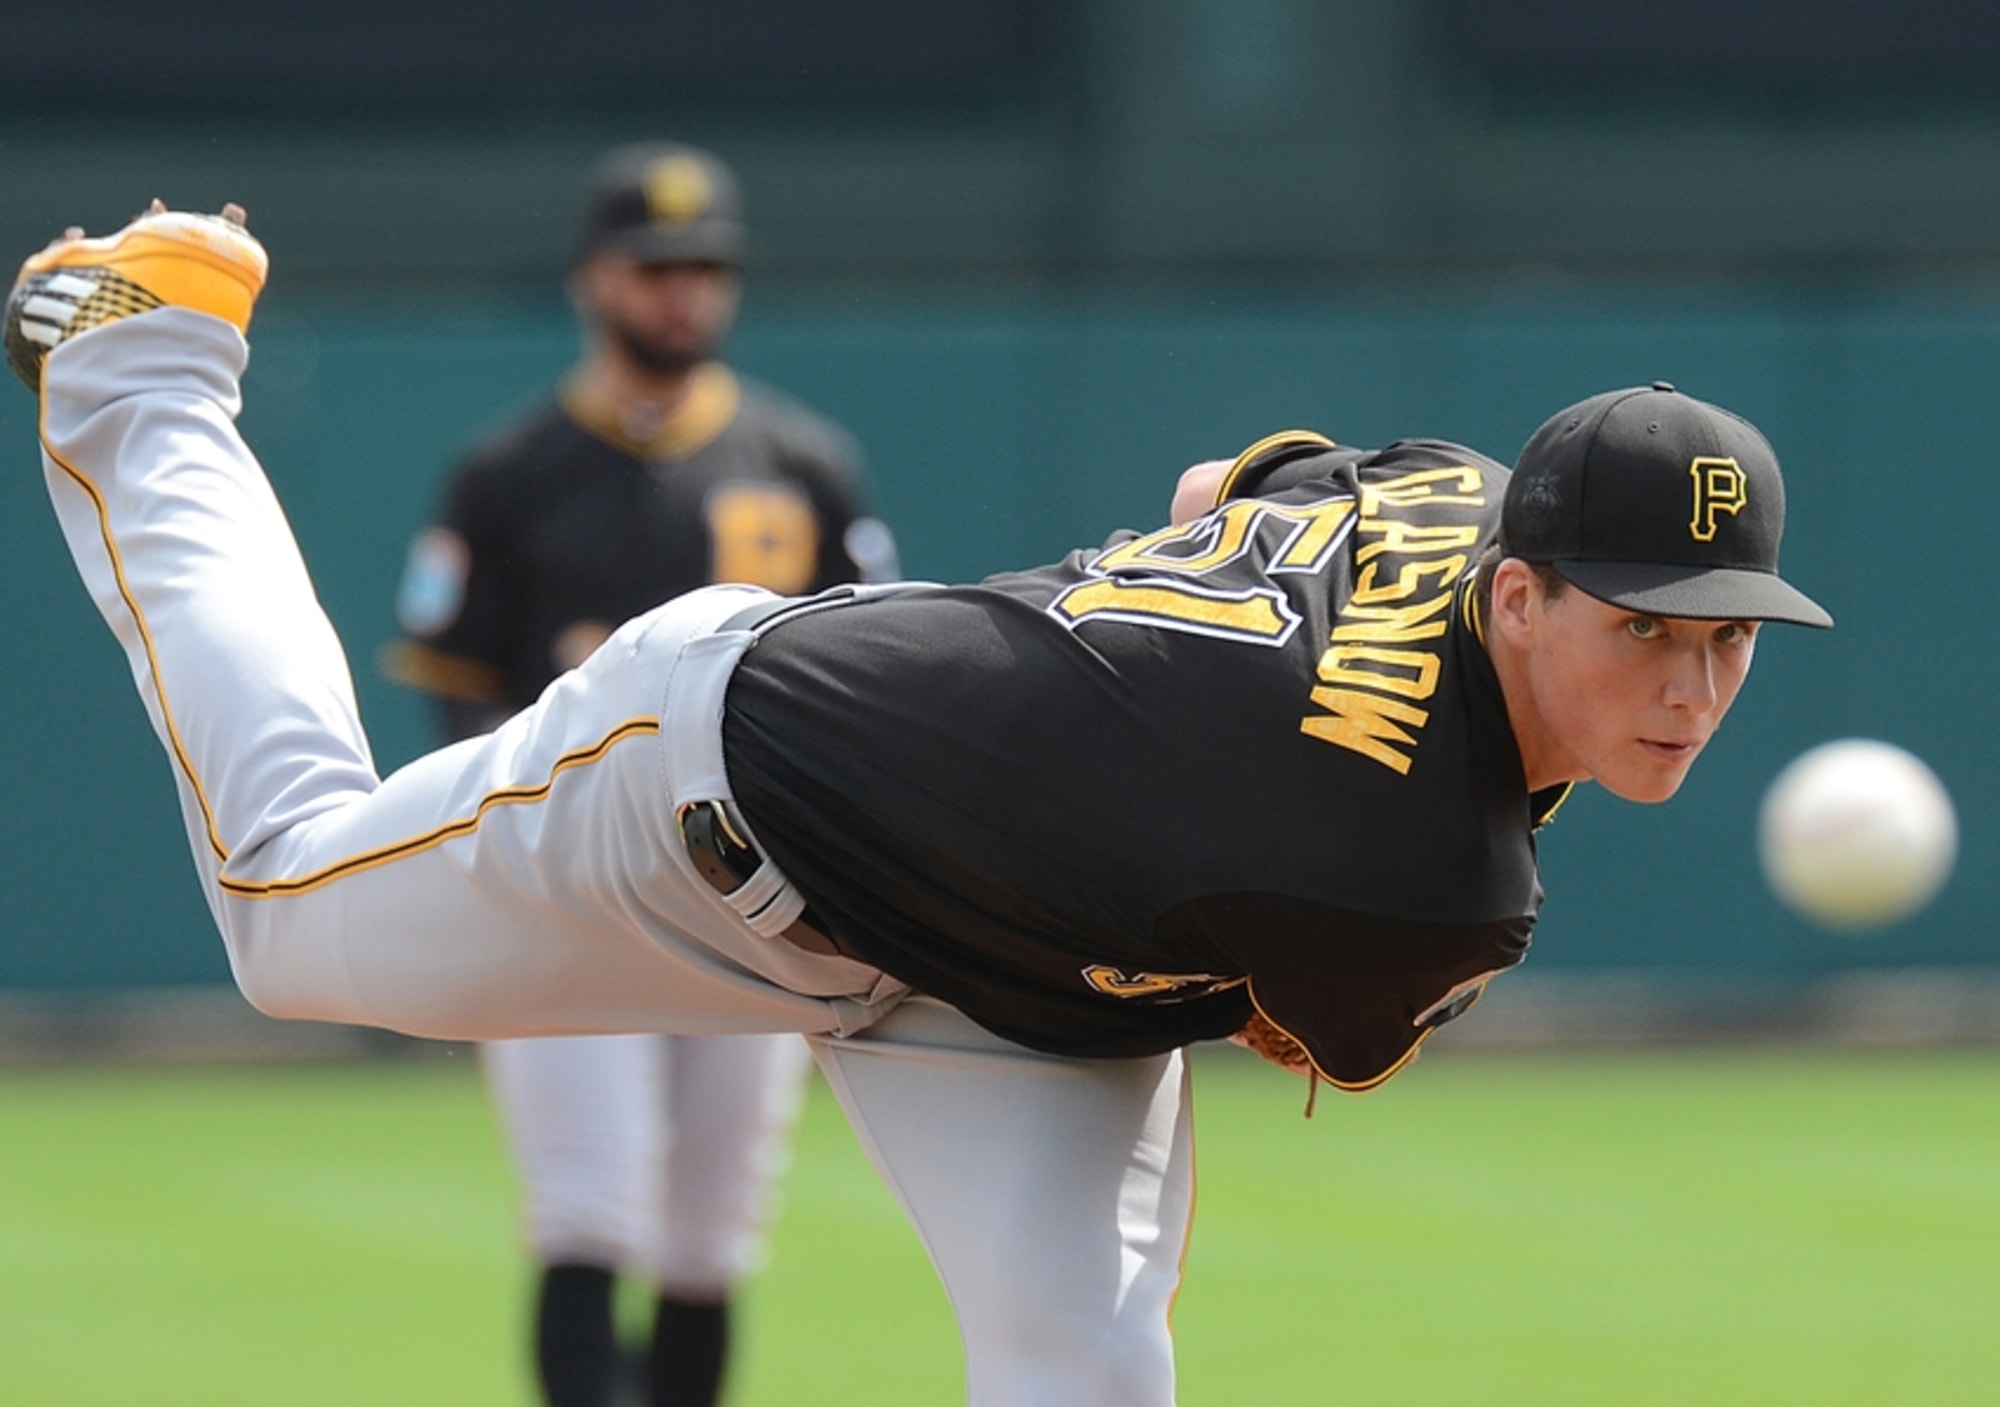 Tyler Glasnow To Make A Rehab State On Monday